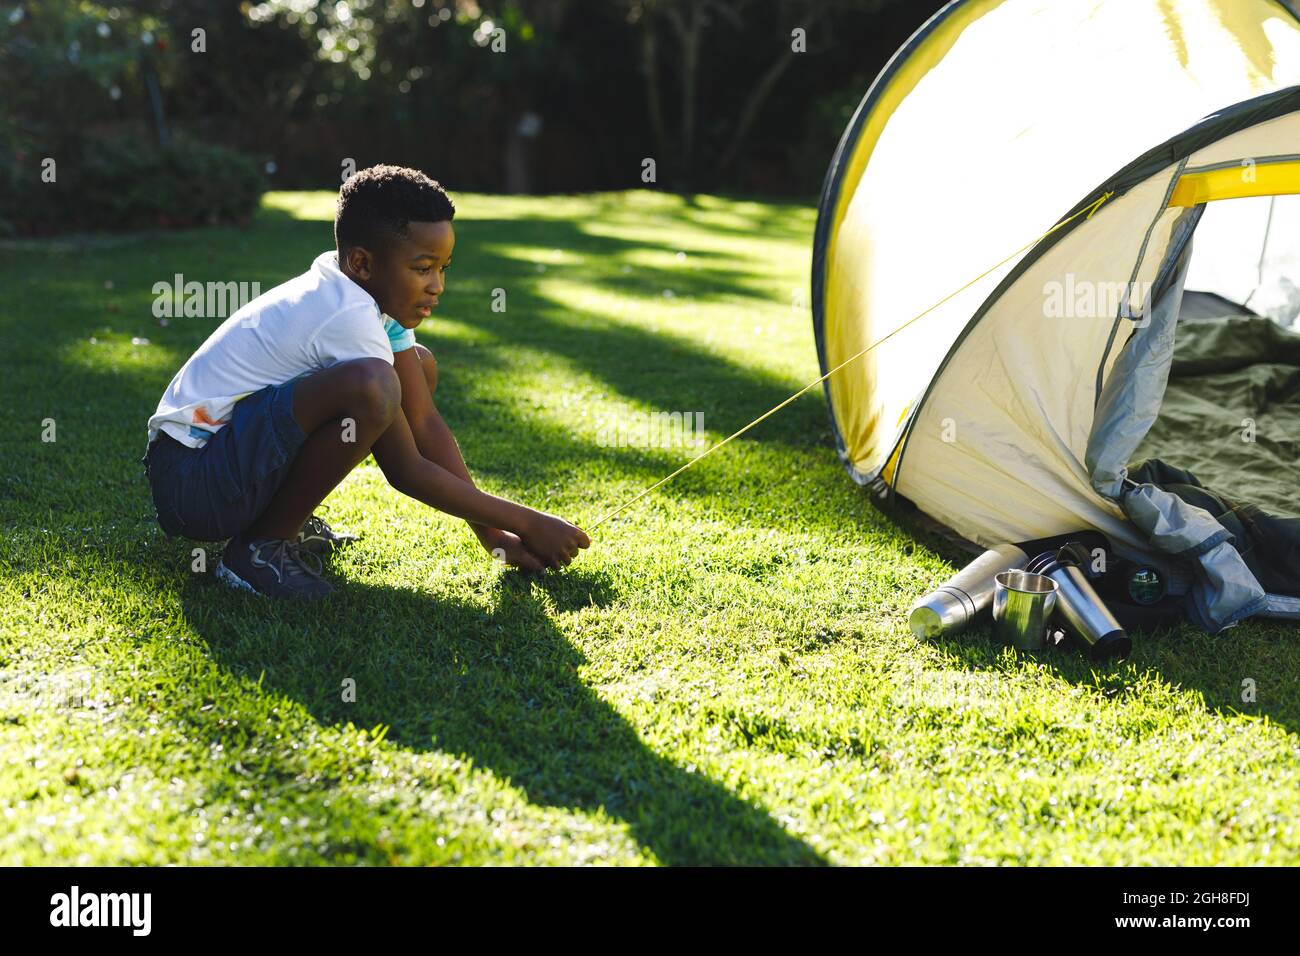 African american boy having fun pitching tent with ropes in sunny garden Stock Photo